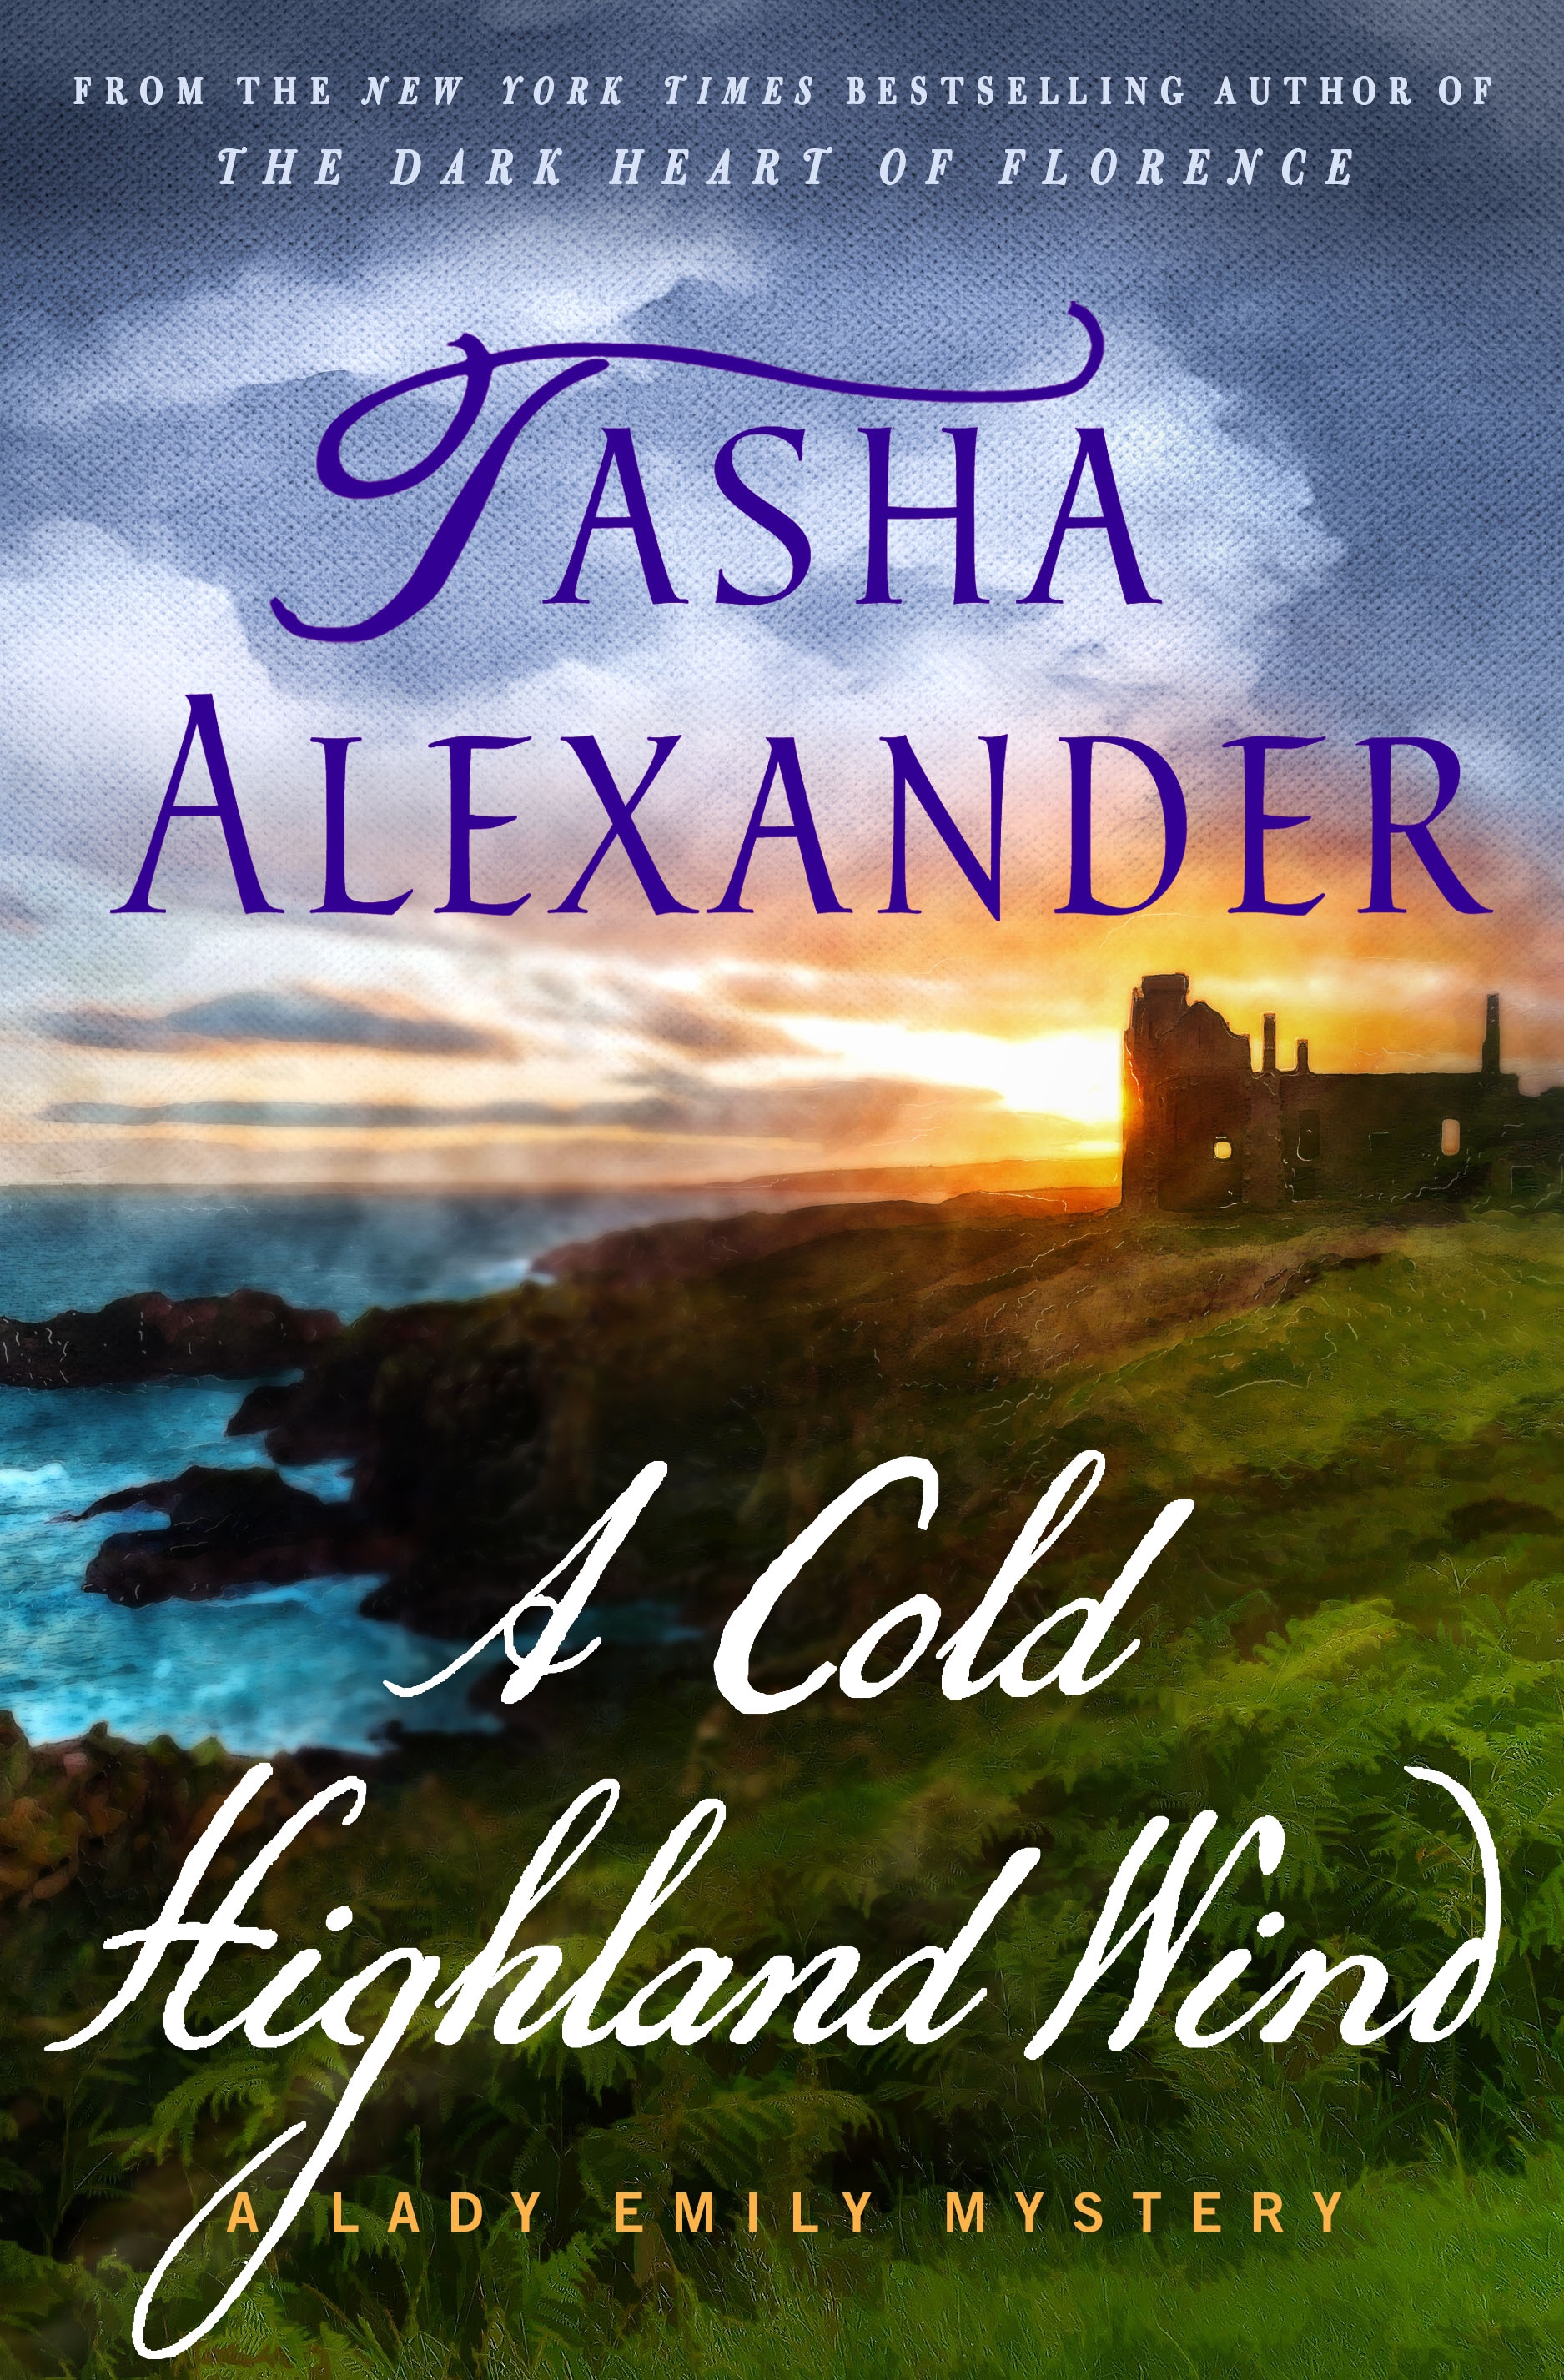 A Cold Highland Wind A Lady Emily Mystery cover image